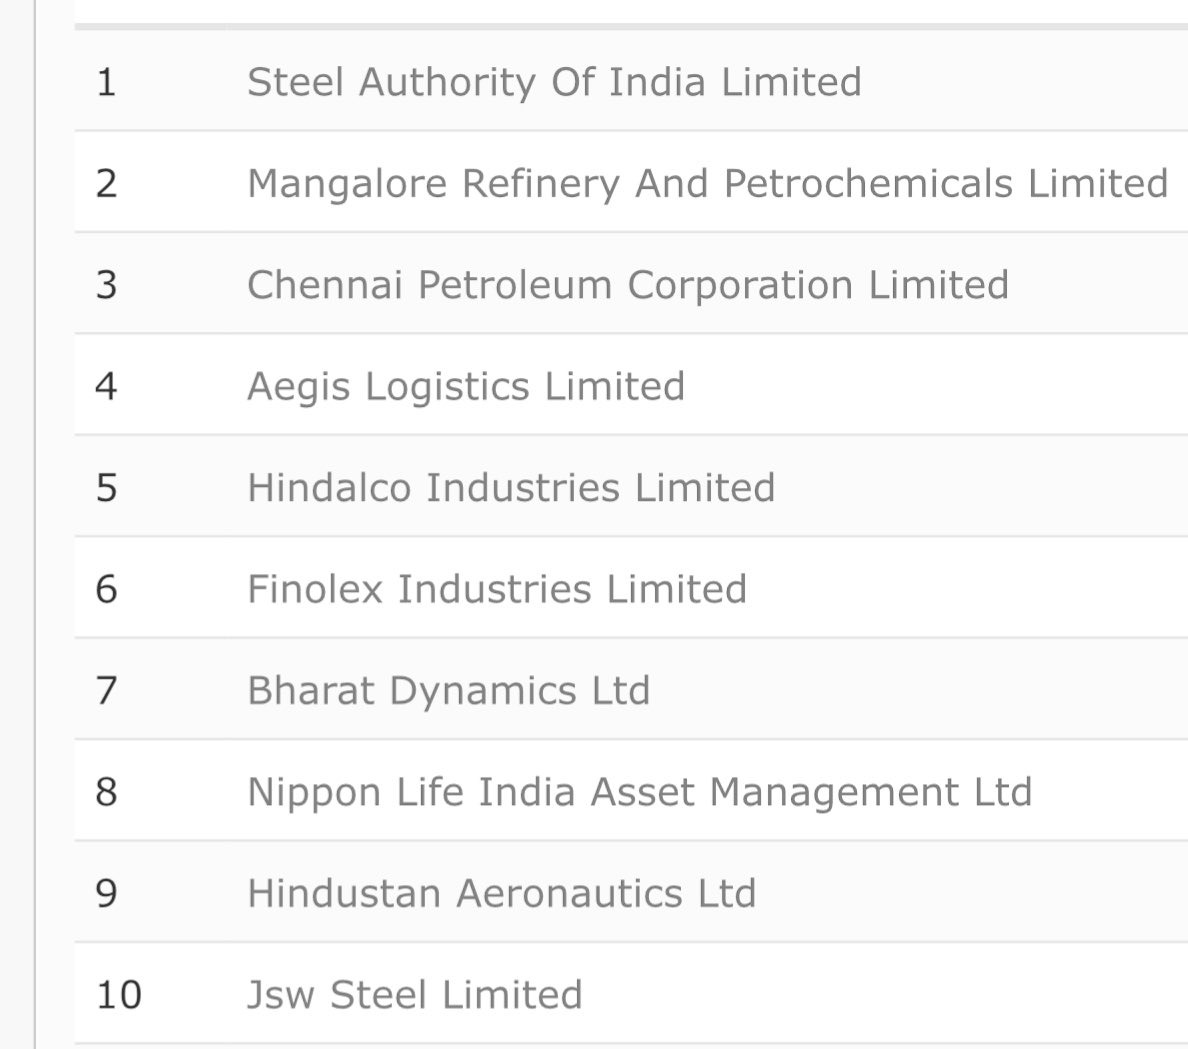 10 High Volume Breakouts today

Watch these for next few days

#BDL
#SAIL
#MRPL

Any other to add ? 

#investing